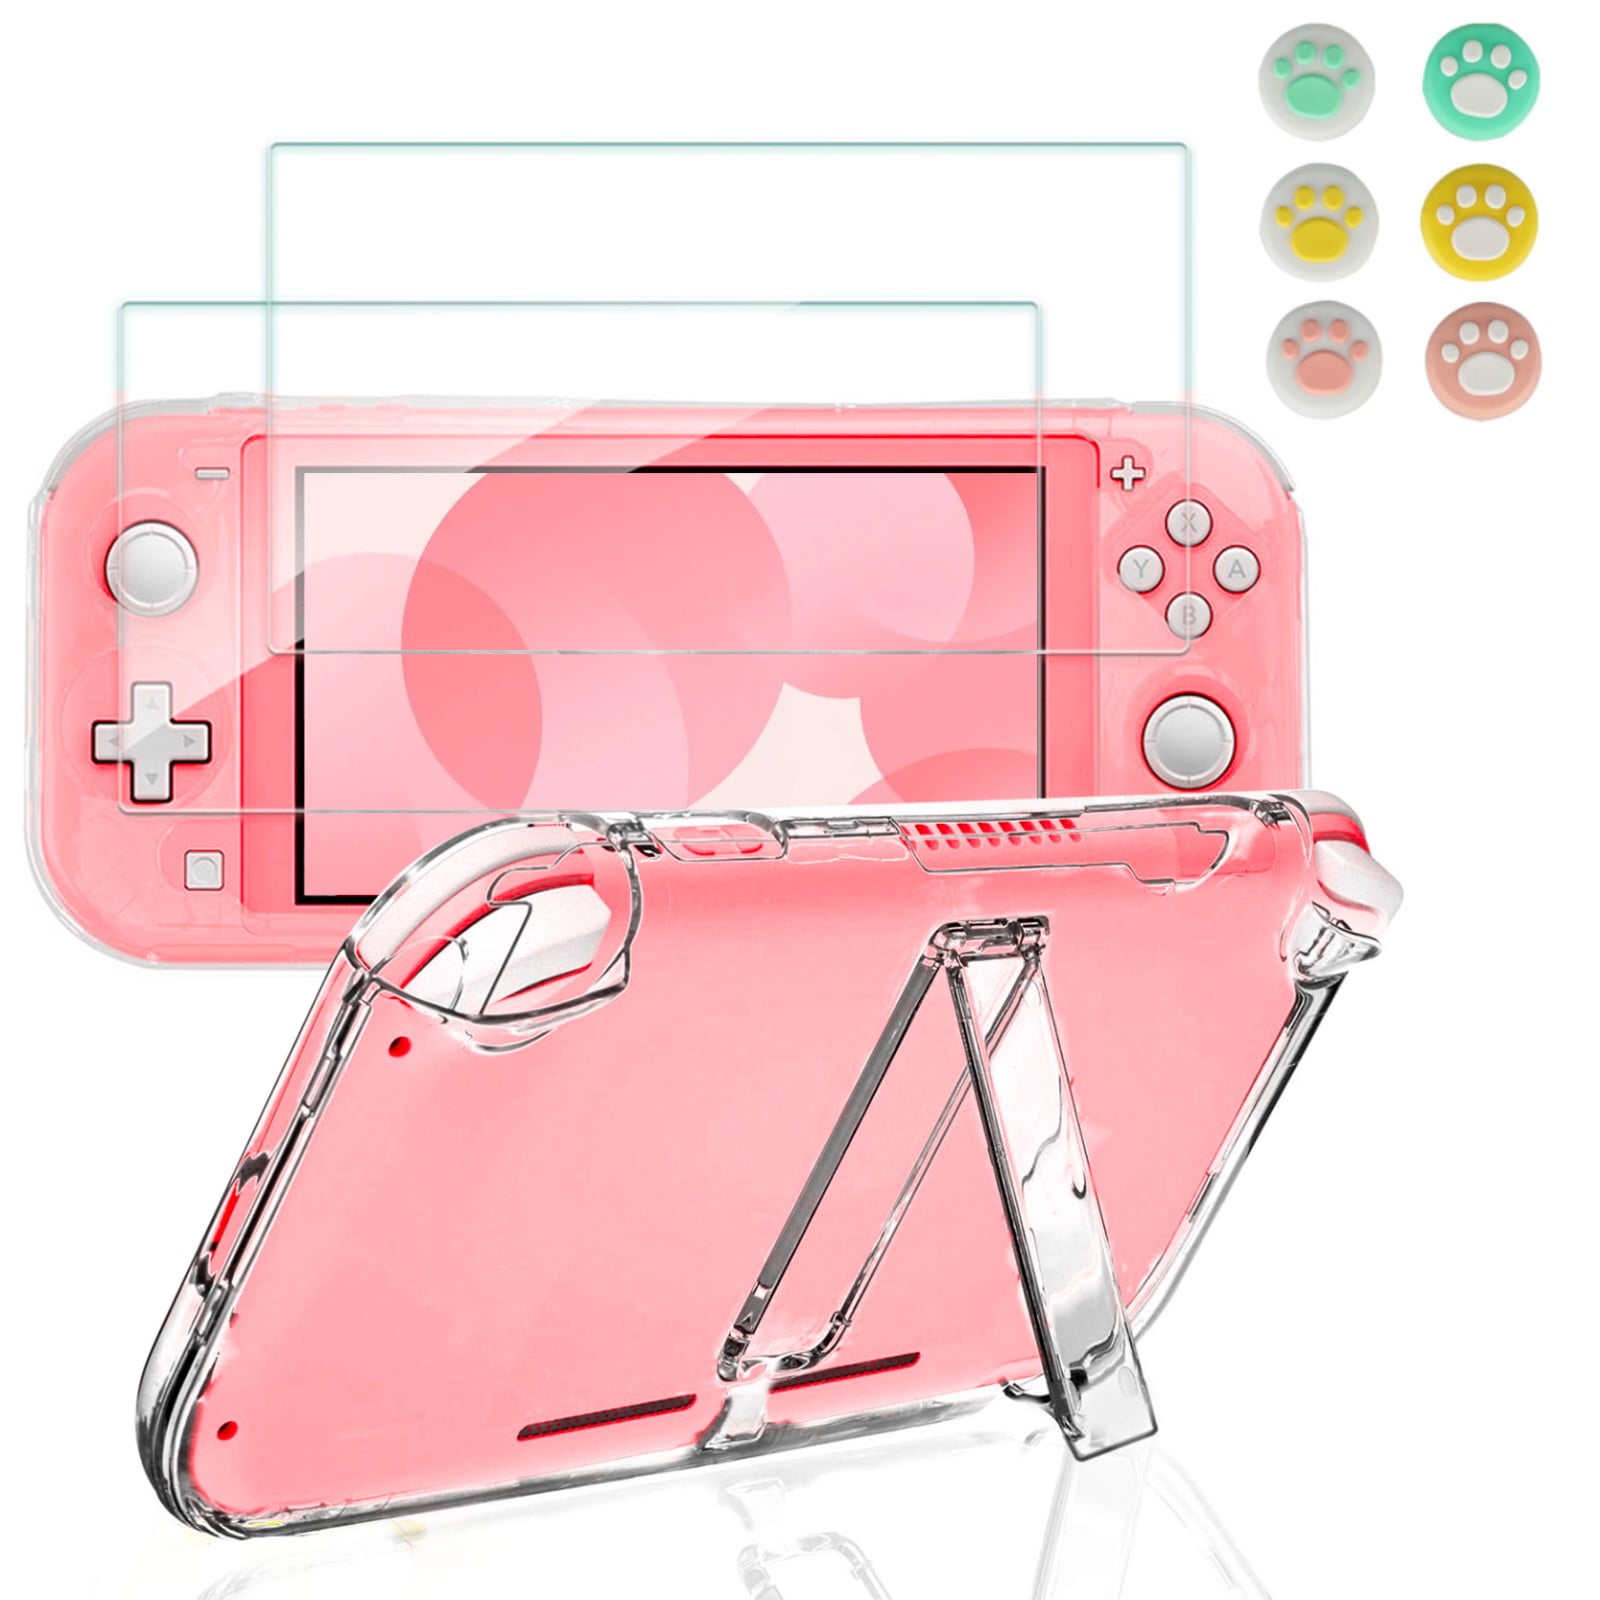 Case Cover Set Fit for Nintendo Switch Lite, EEEkit Protective Cover Protector Case Compatible Switch Lite 2019 Console w/Shock-Absorption & Anti-Scratch Design, NS Lite Accessories11 Walmart.com